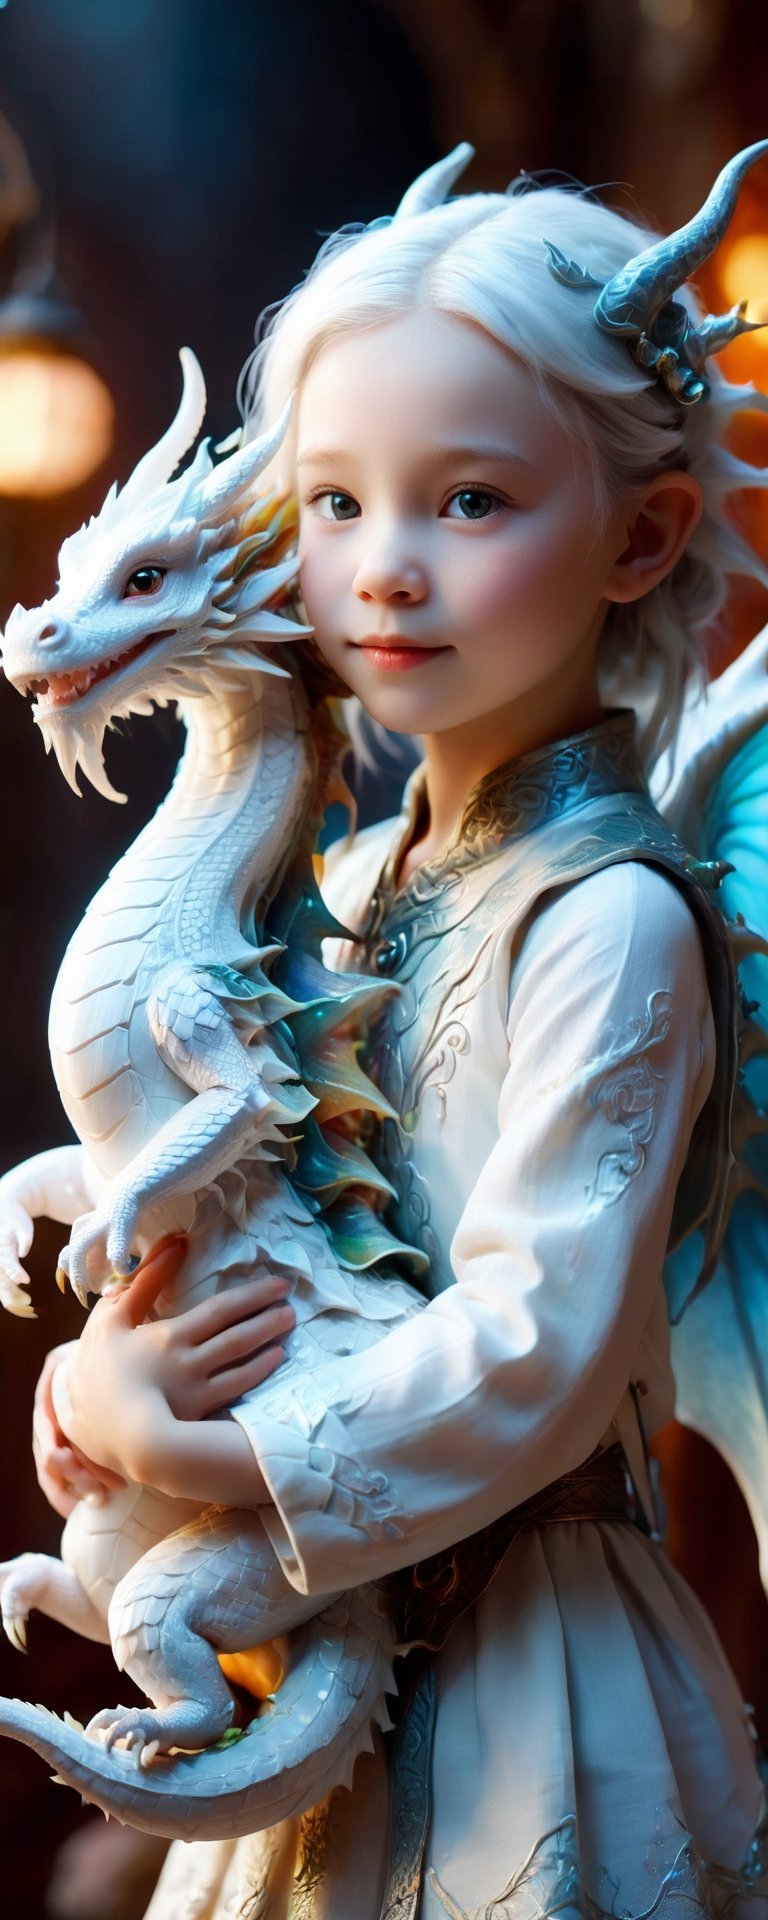 Full body portrait of an adorable little white dragon girl, humanoid features with subtle dragon-like aspects, gentle and charming, clutching a tiny dragon plushie, fanciful and imaginative clothing, warm and welcoming expression, by FuturEvoLab, (masterpiece: 2), best quality, ultra highres, original, extremely detailed, perfect soft lighting, captivating and lovable character